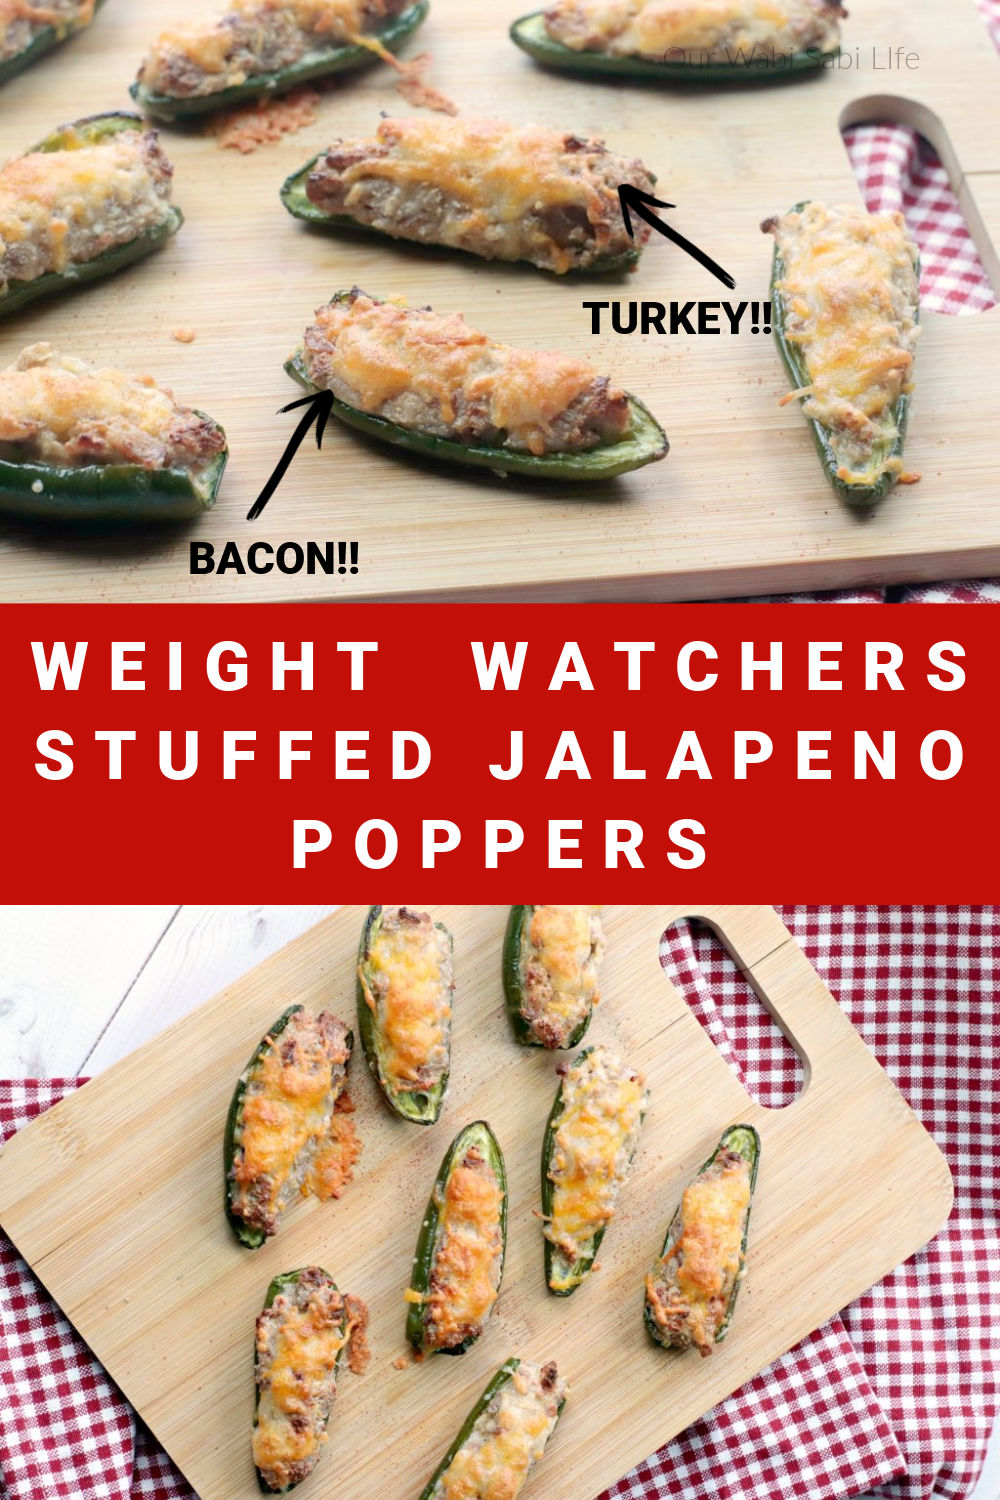 https://ourwabisabilife.com/wp-content/uploads/2020/12/Stuffed-Poppers.jpg